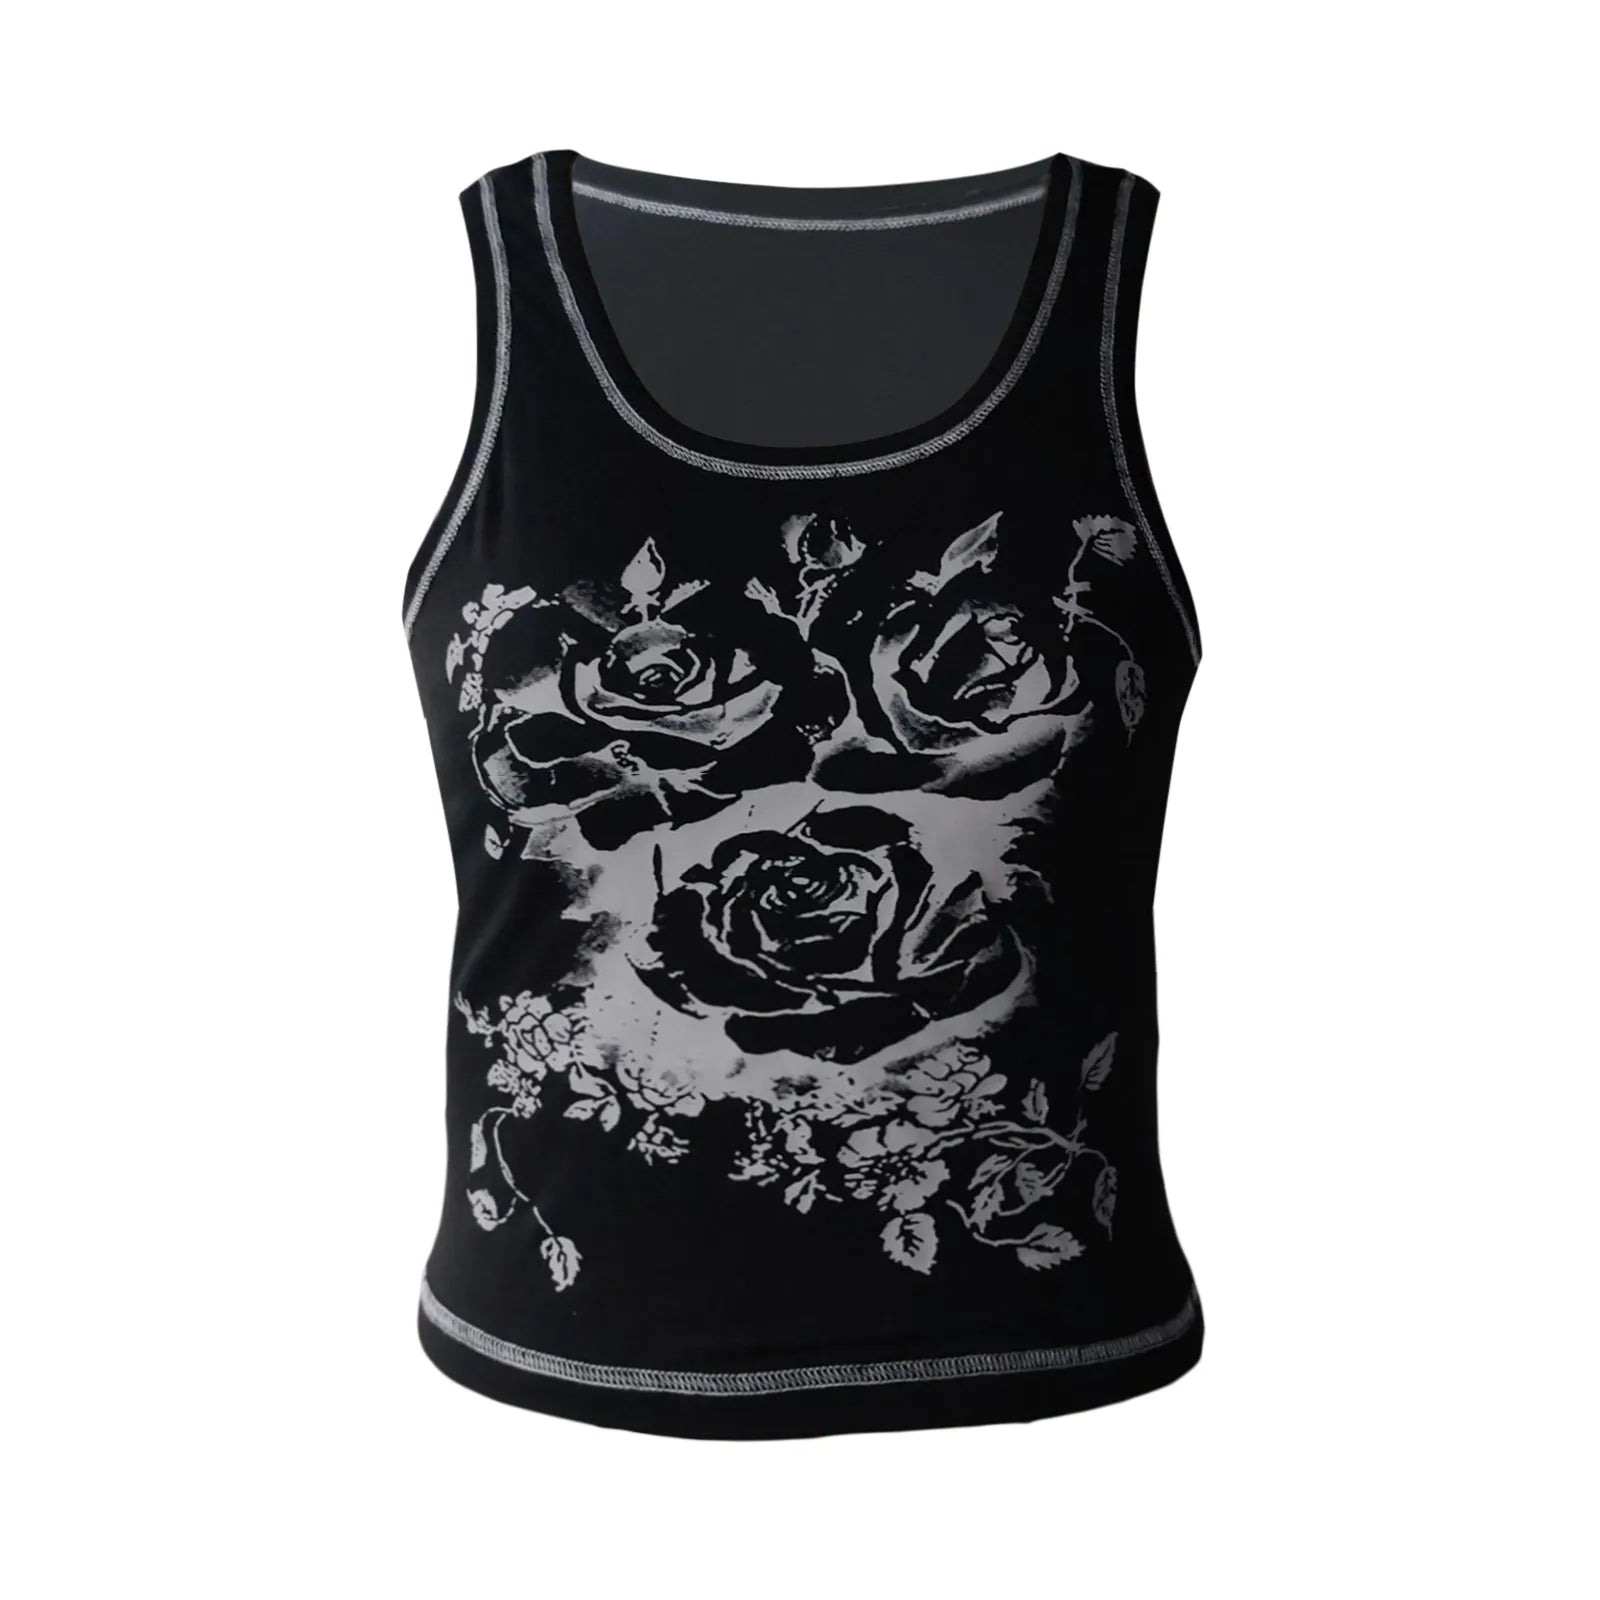 E-girl Gothic Grunge Lace Trim Camisole - Y2K Fairy Coquette Crop Top - Type 15 / S - Women’s Clothing & Accessories